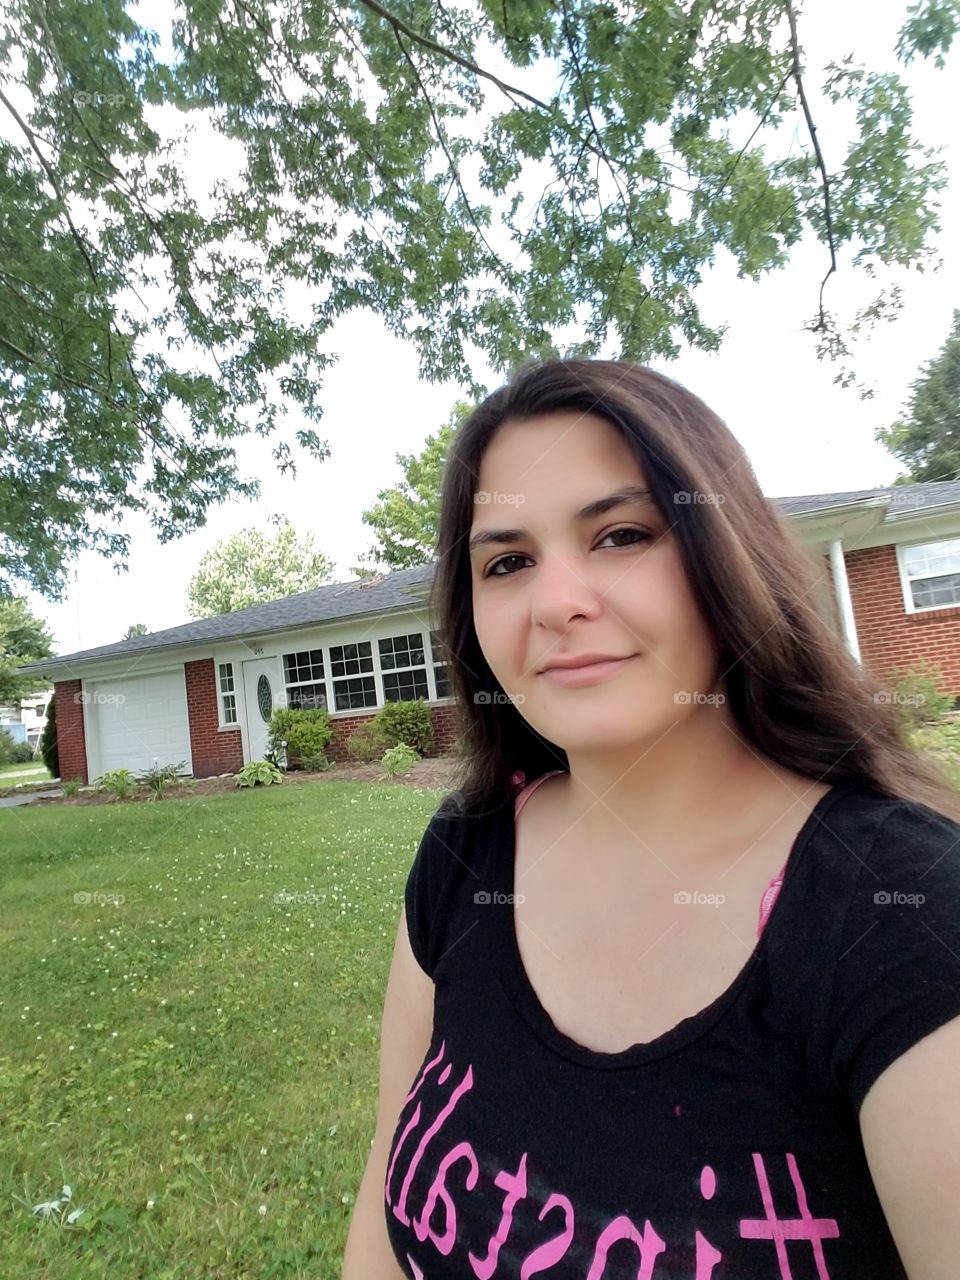 Me standing in front of my dad's new house!